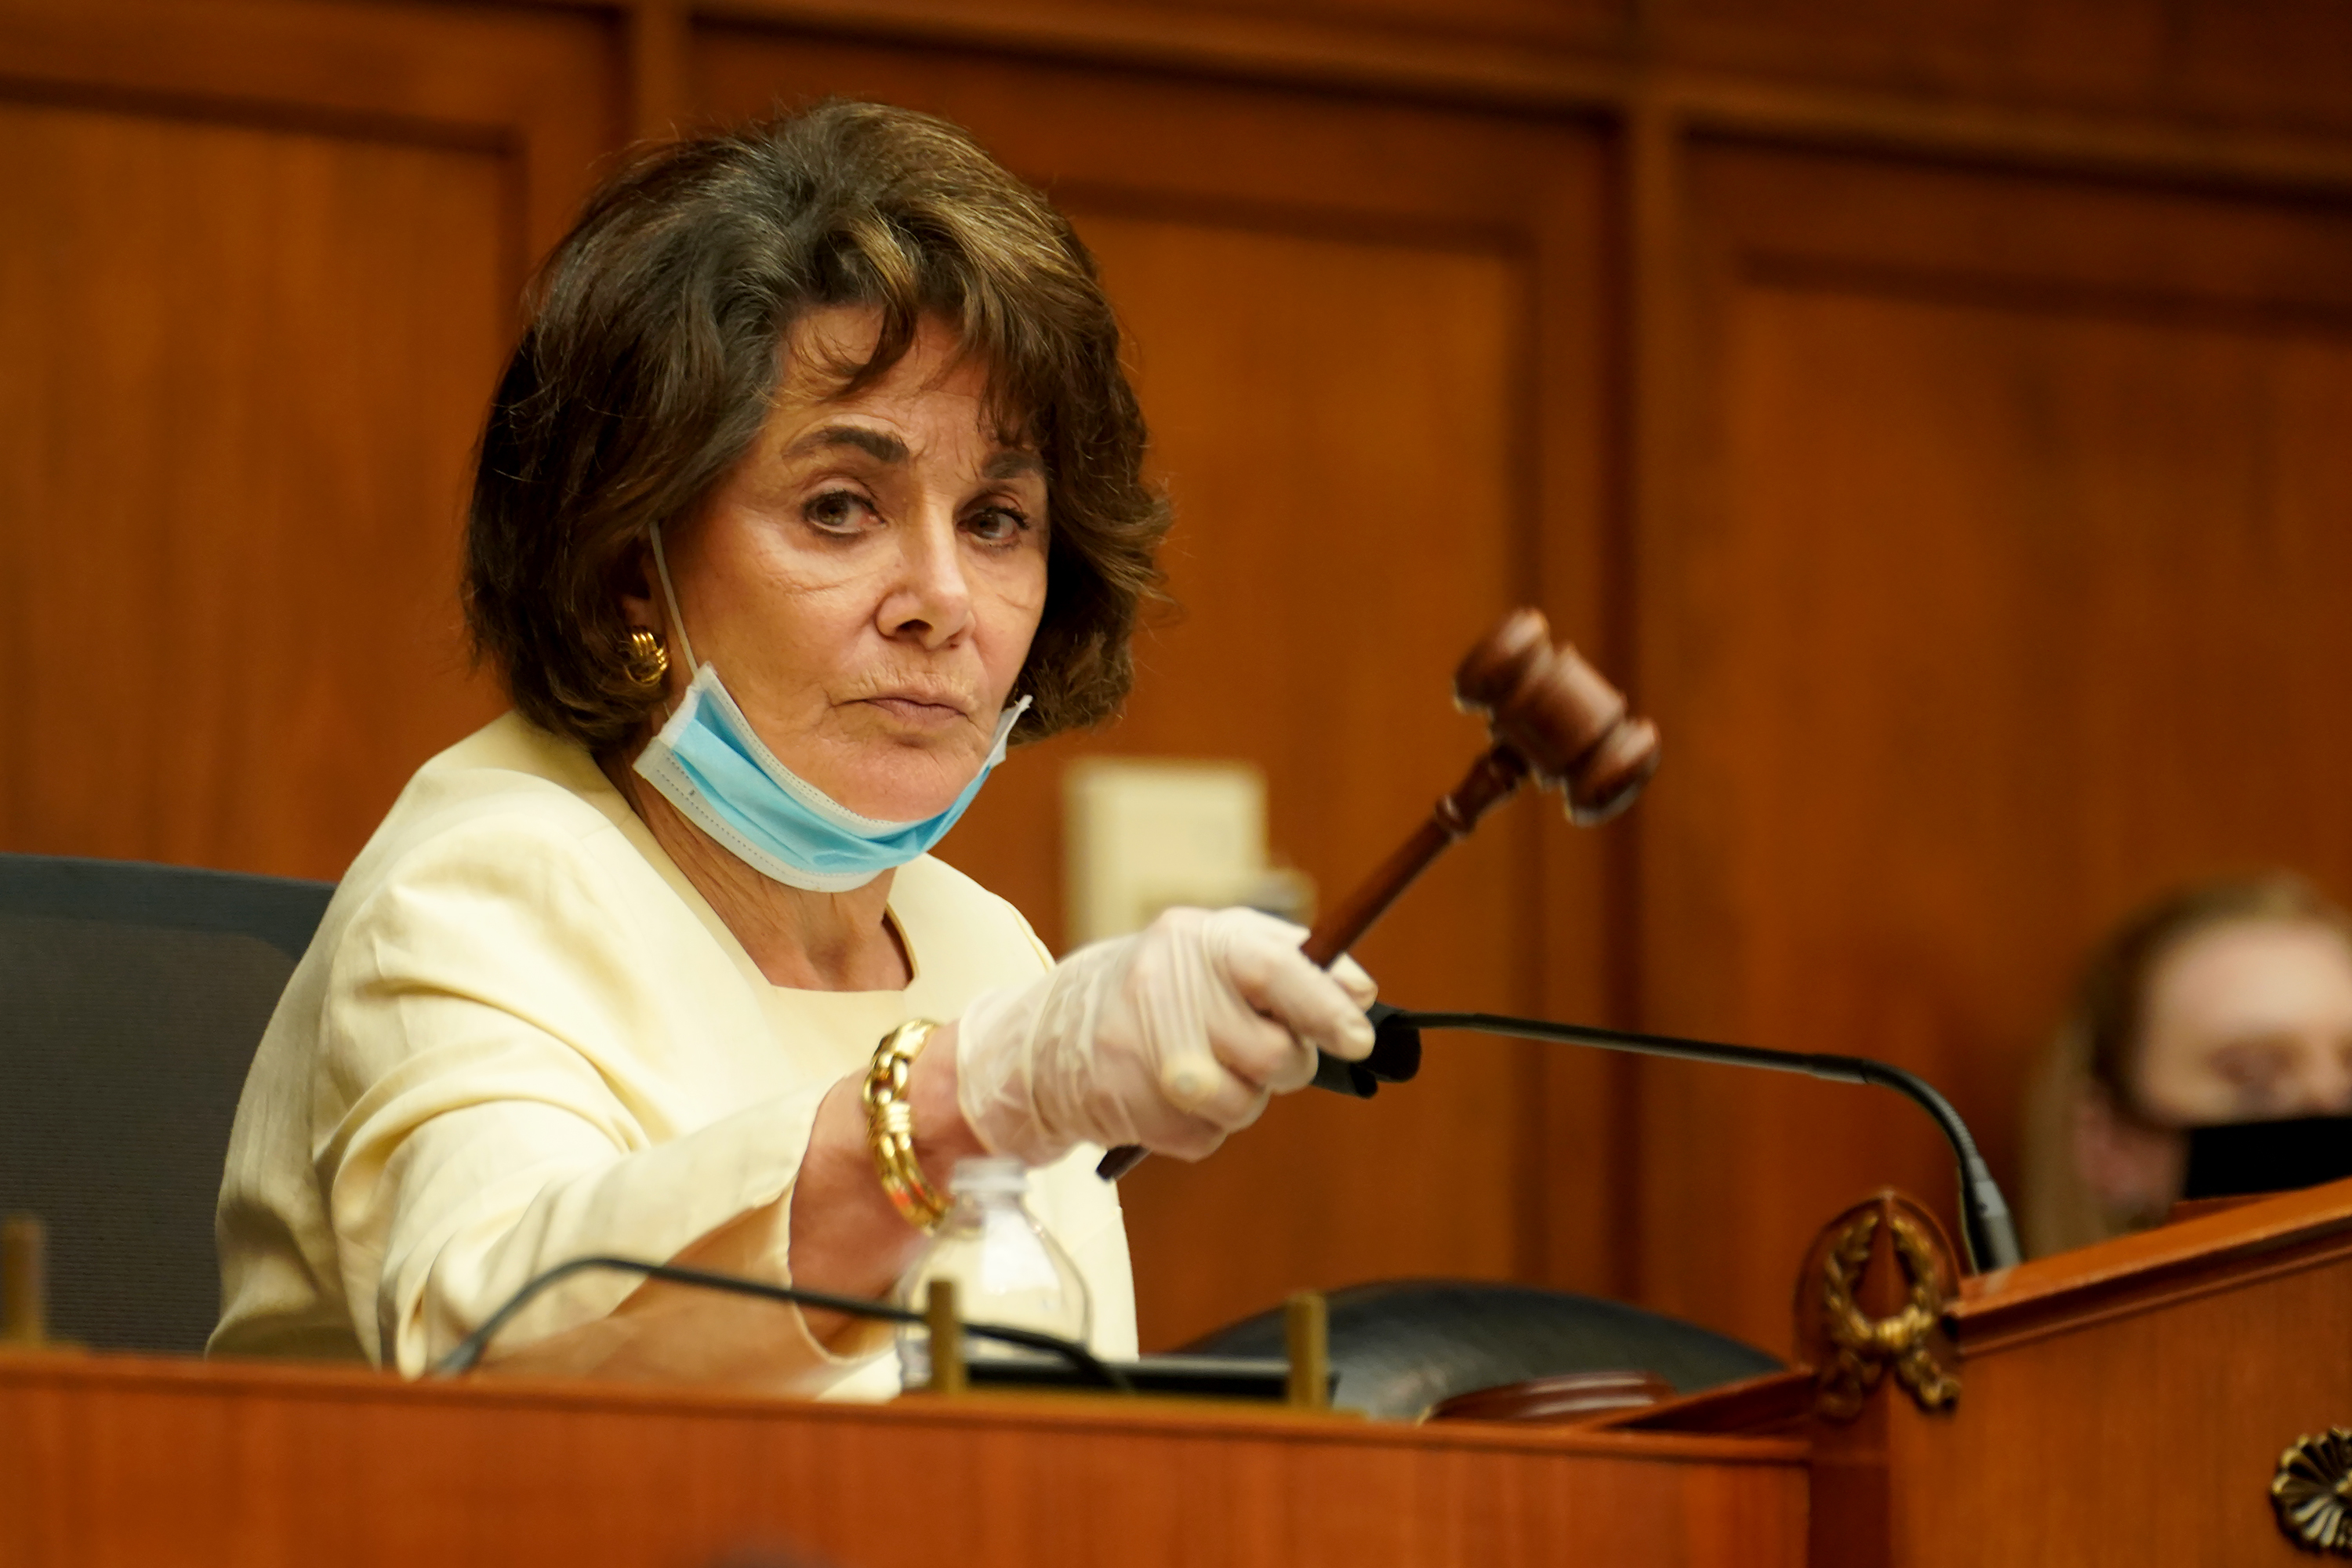 A serious woman in a suit raises a gavel.